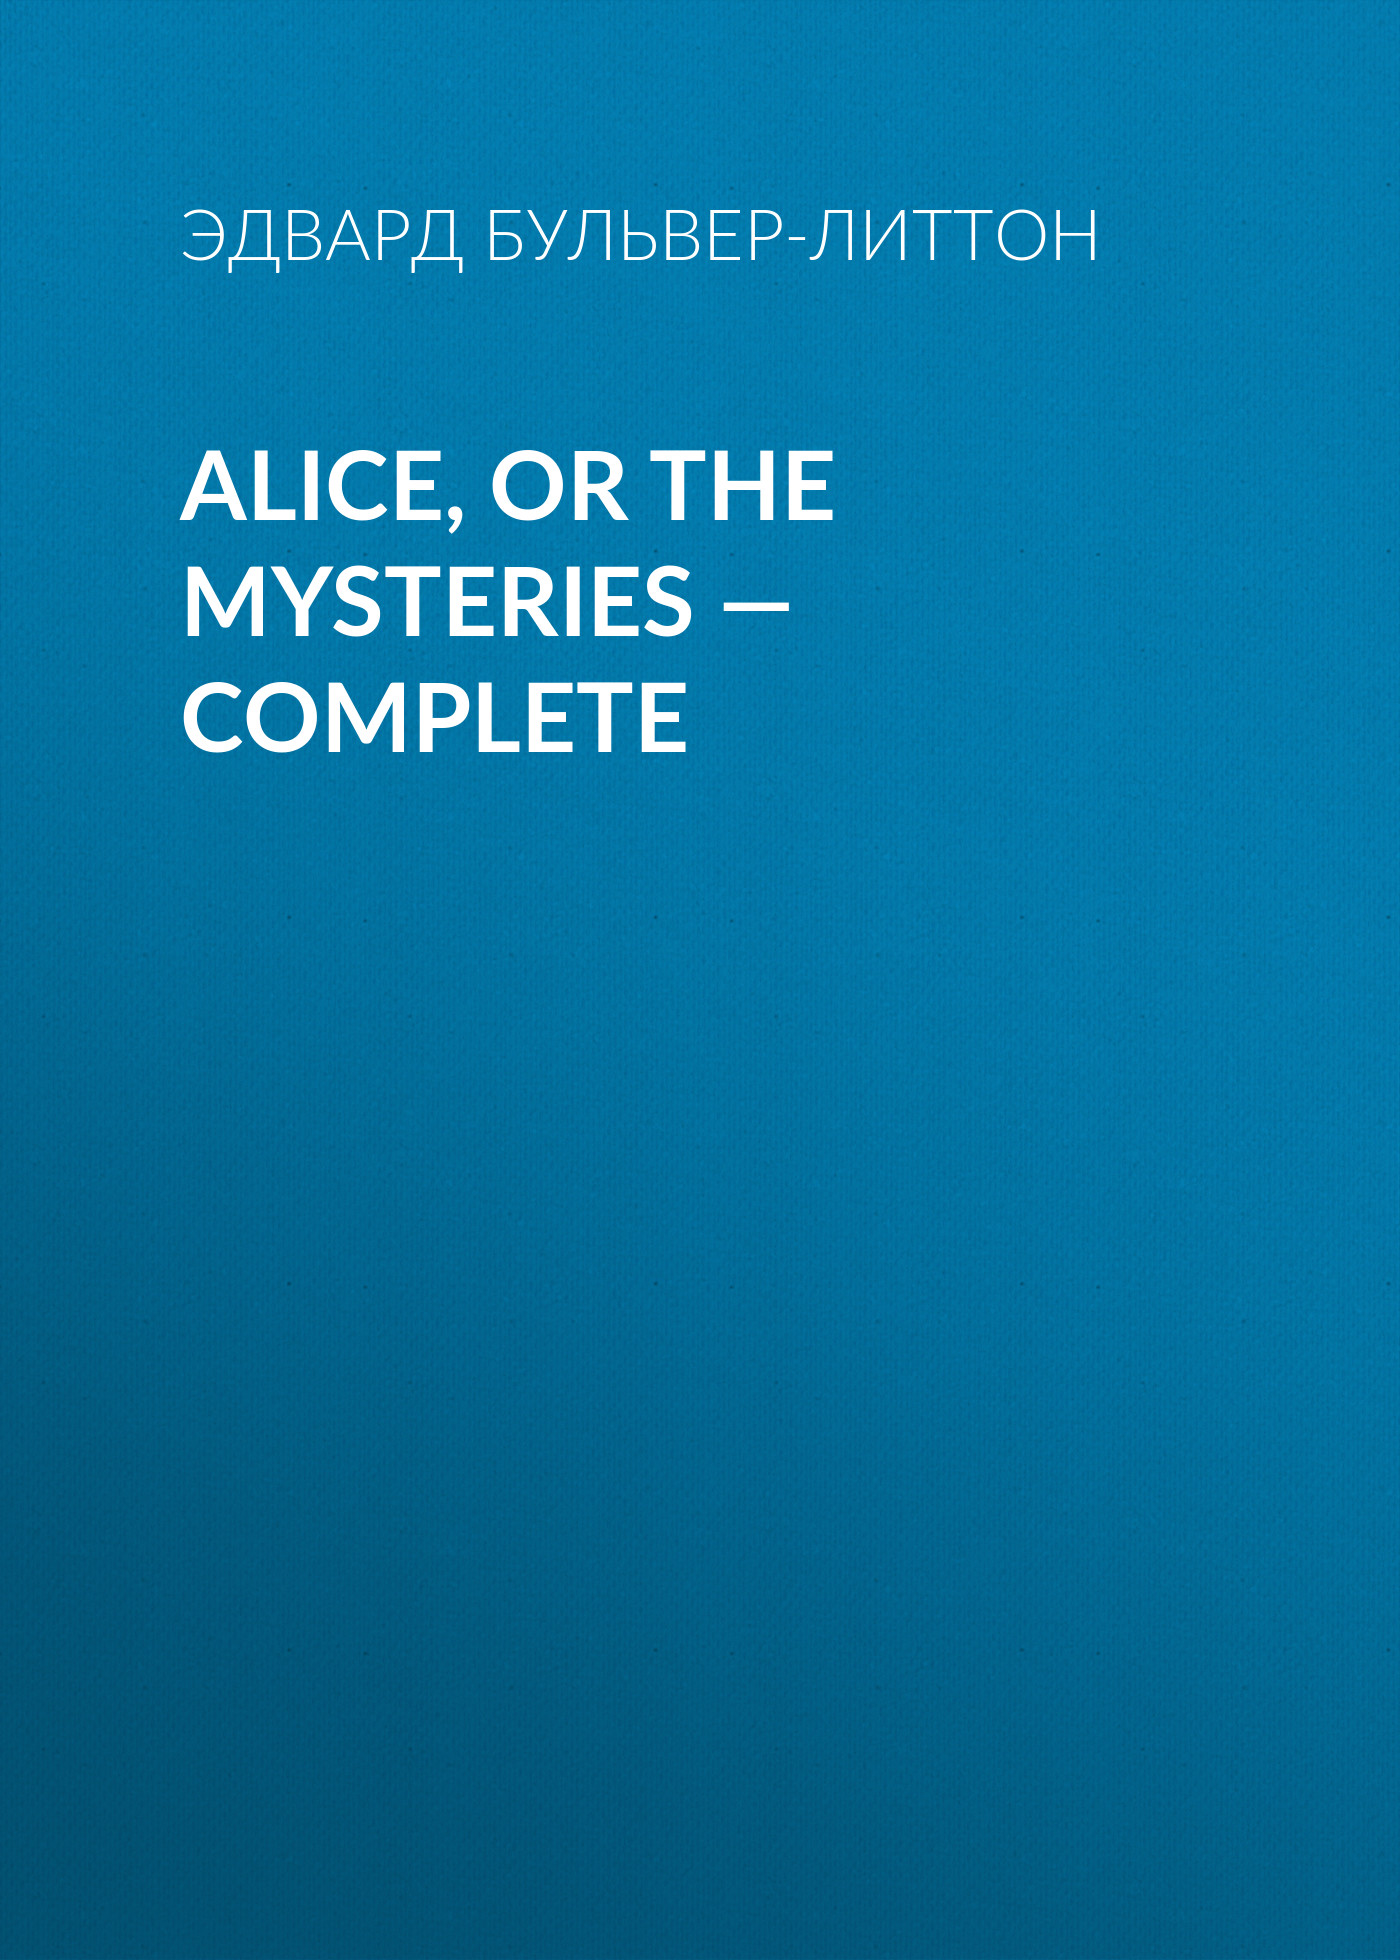 Alice, or the Mysteries— Complete